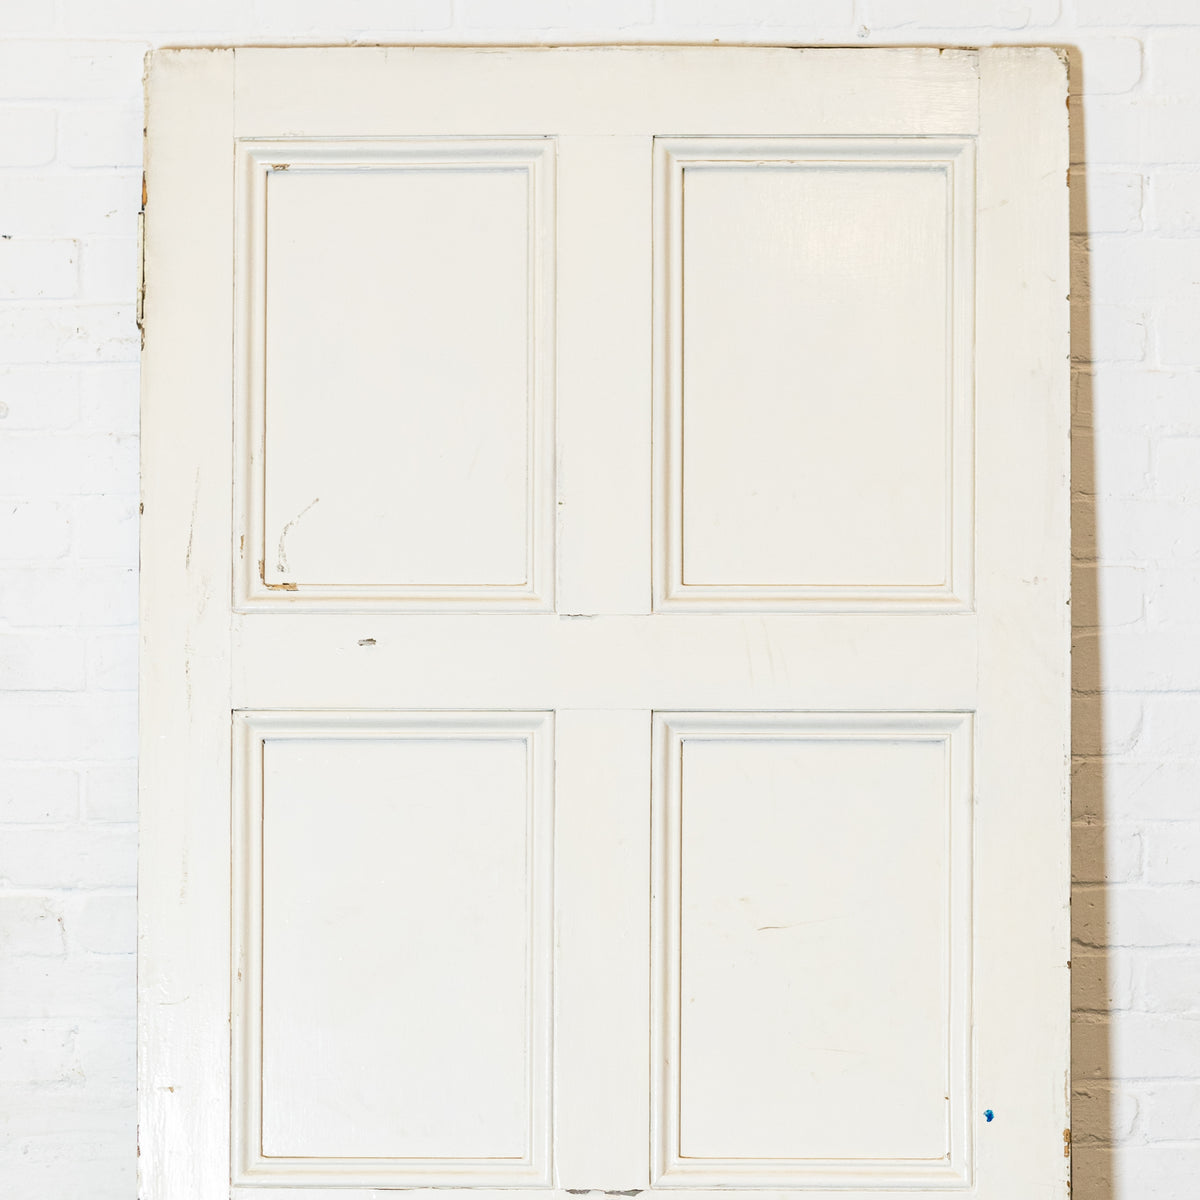 Large Georgian Style Solid Pine Panelled Door - 225.5cm x 104.5cm | The Architectural Forum